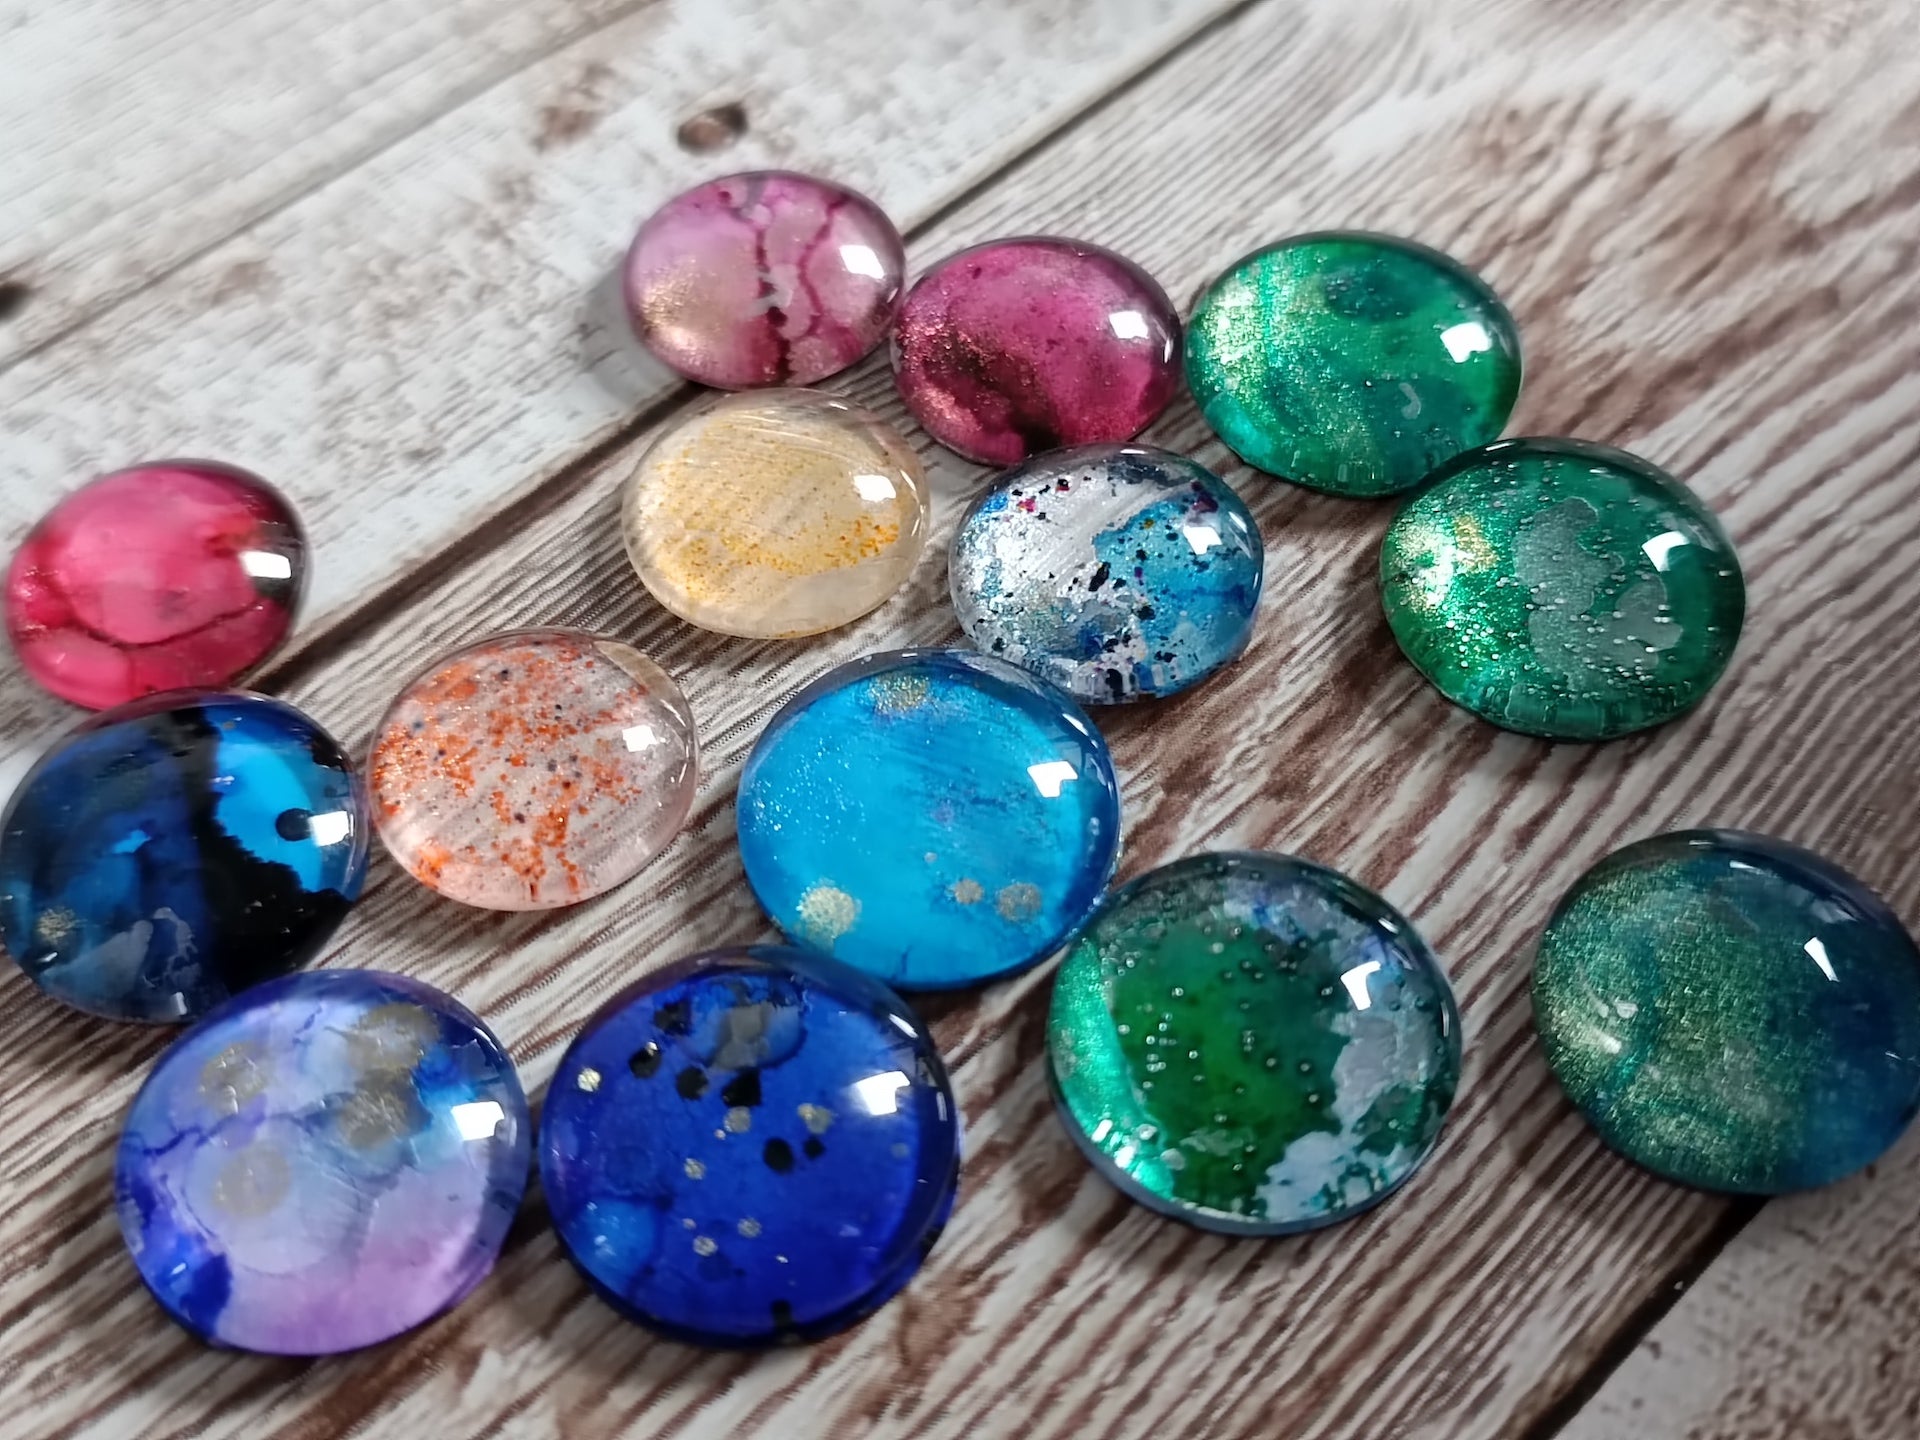 Handmade glass pebbles/ cabochons, ideal embellishments for mixed media/ scrapbooking projects